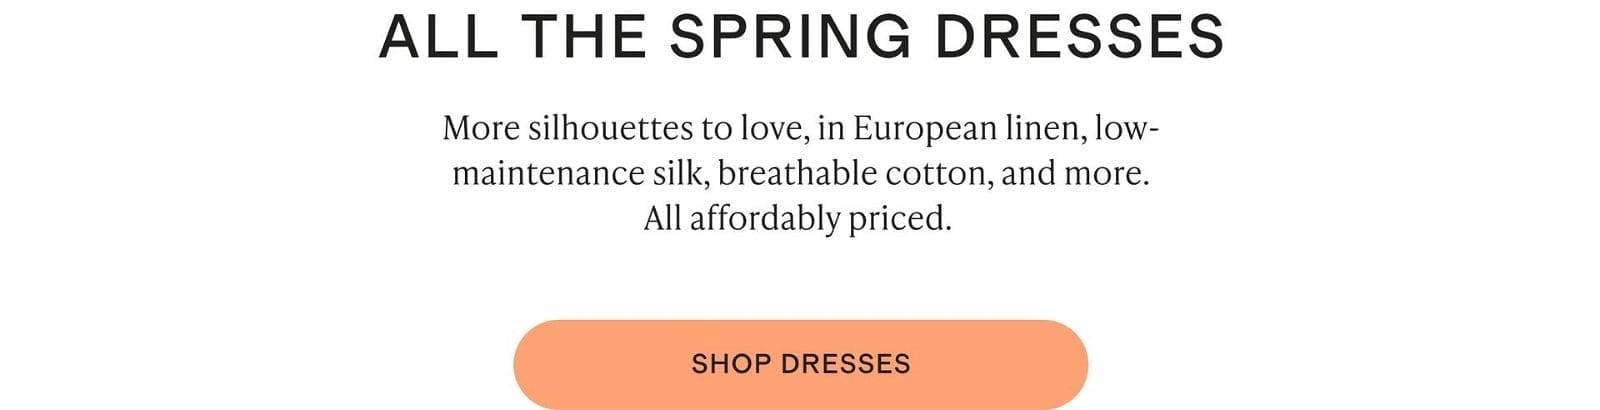 ALL THE SPRING DRESSES